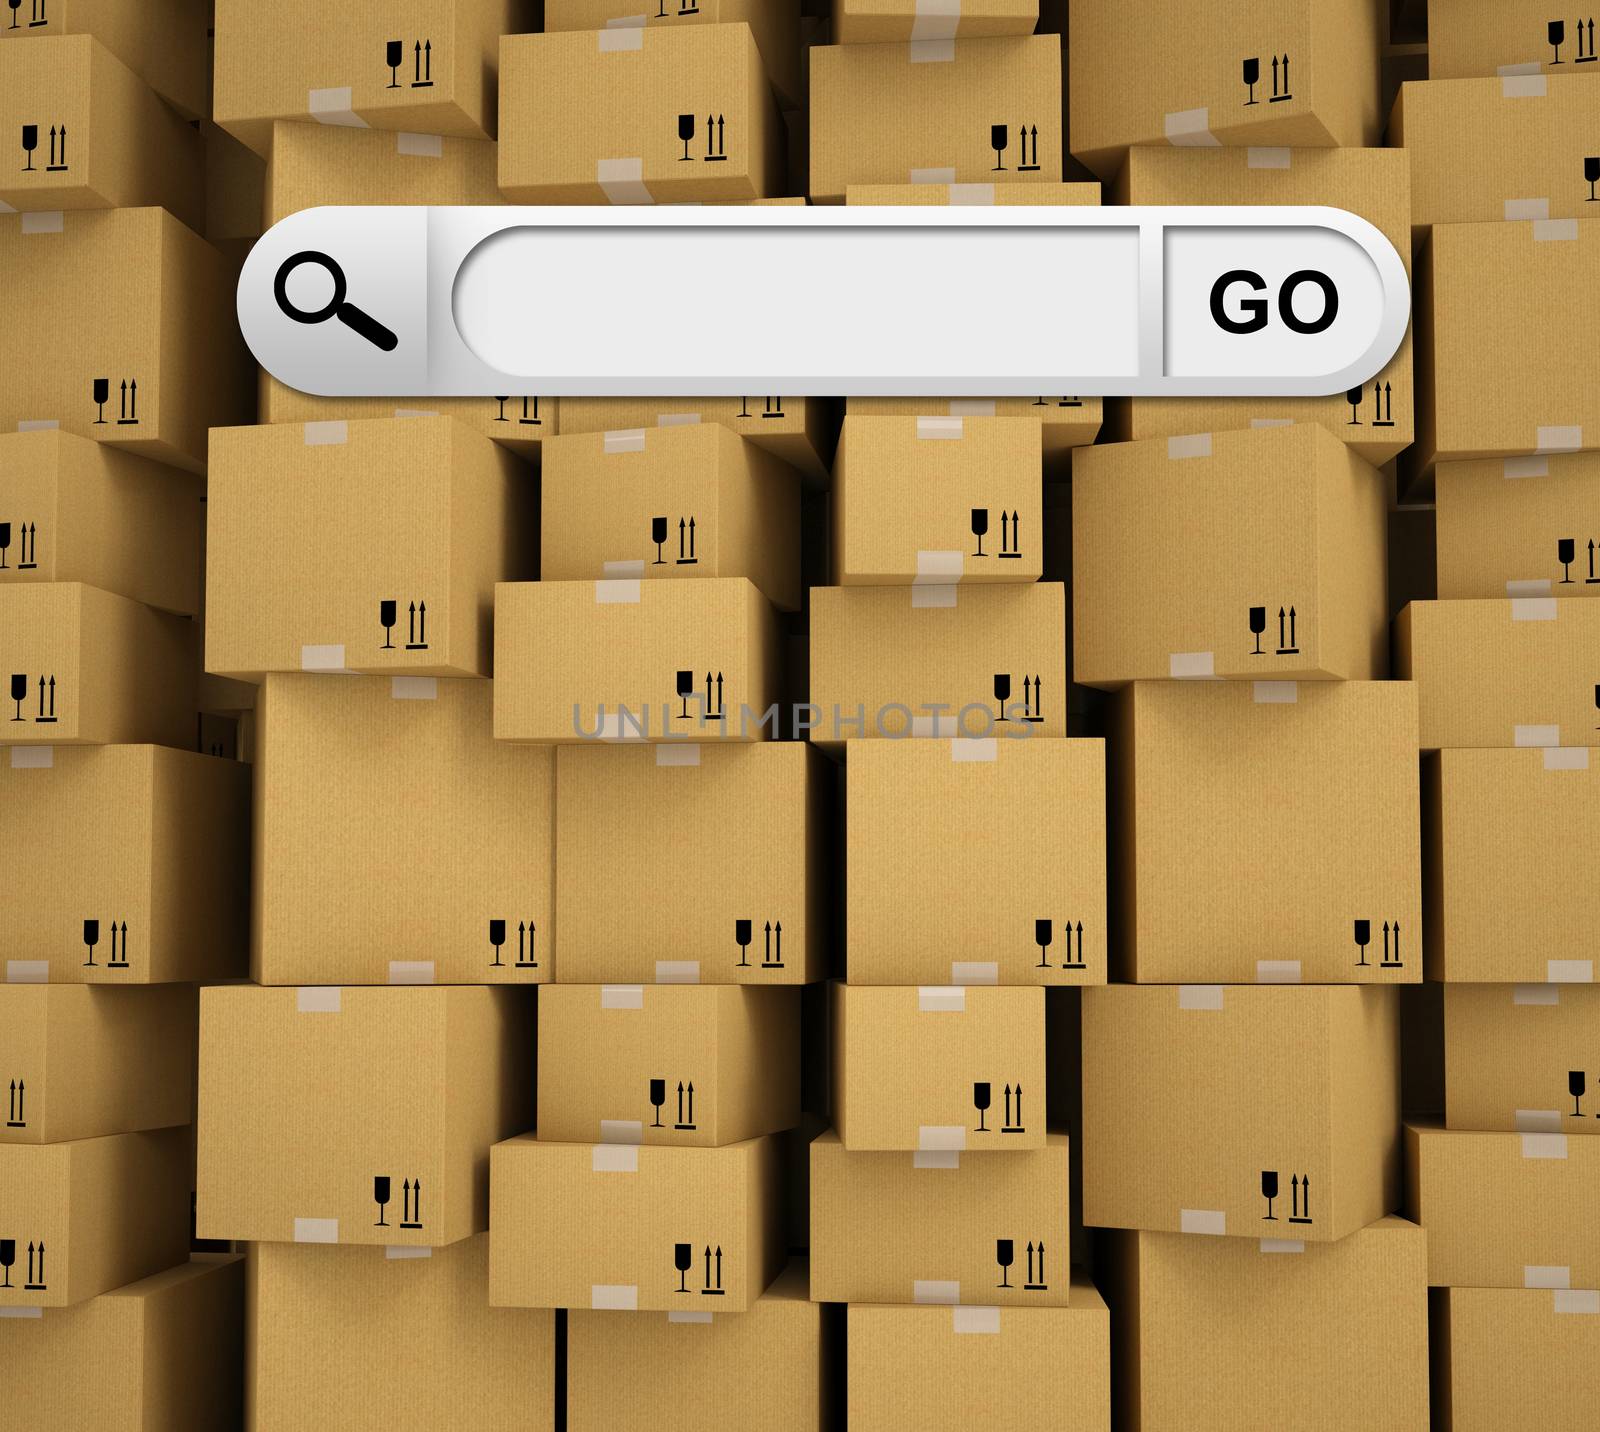 Search bar in browser. Wall of cardboard box as backdrop